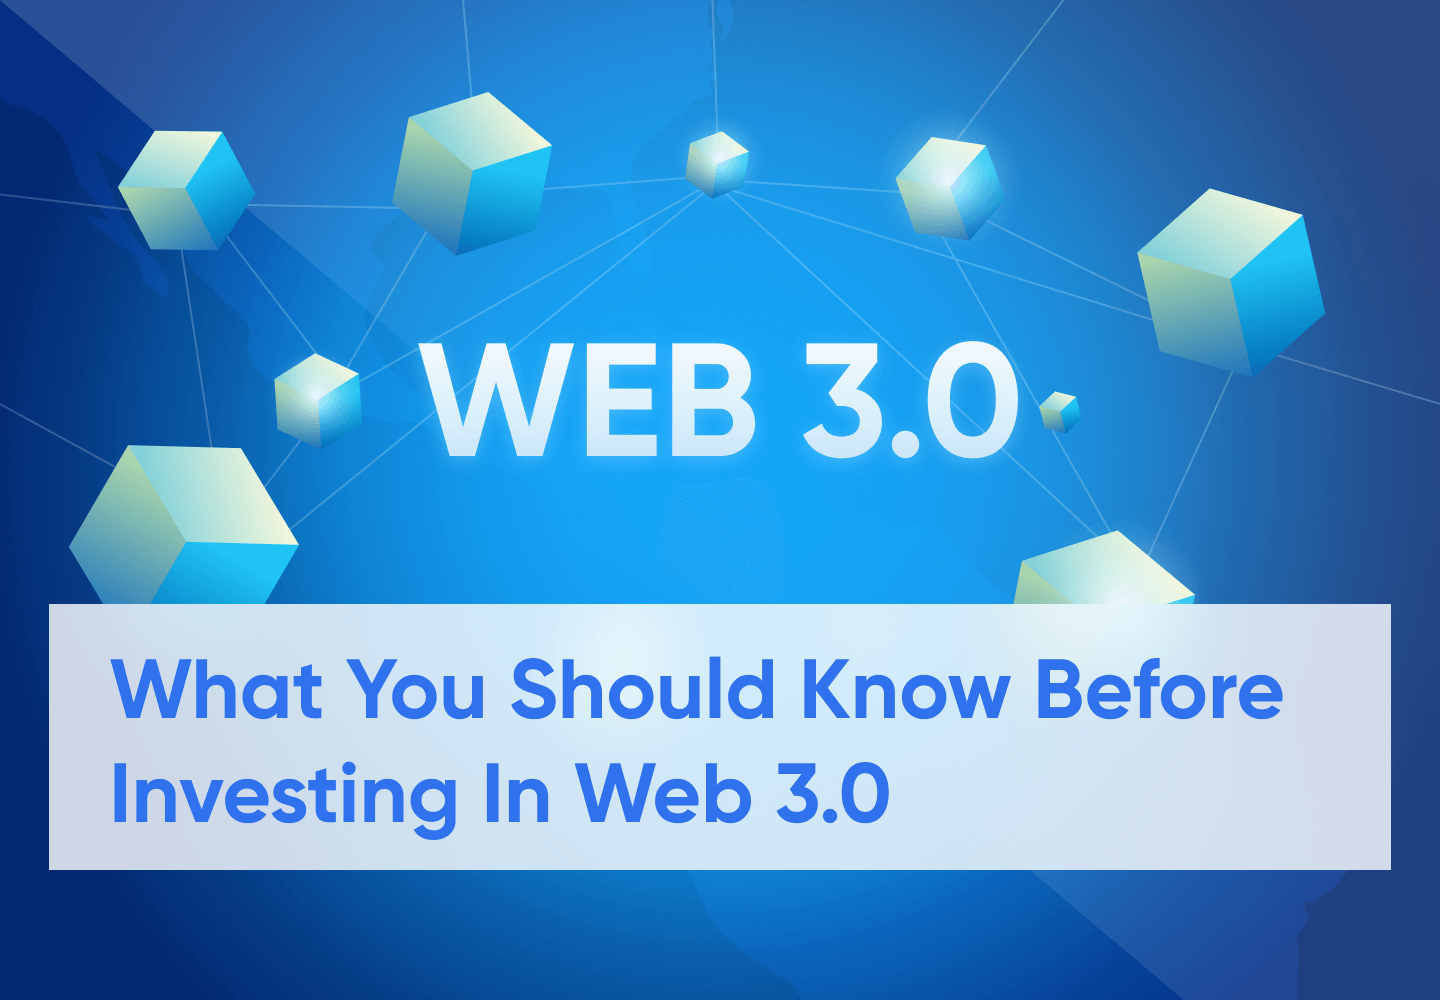 Easy Steps On How To Invest In Web 3.0